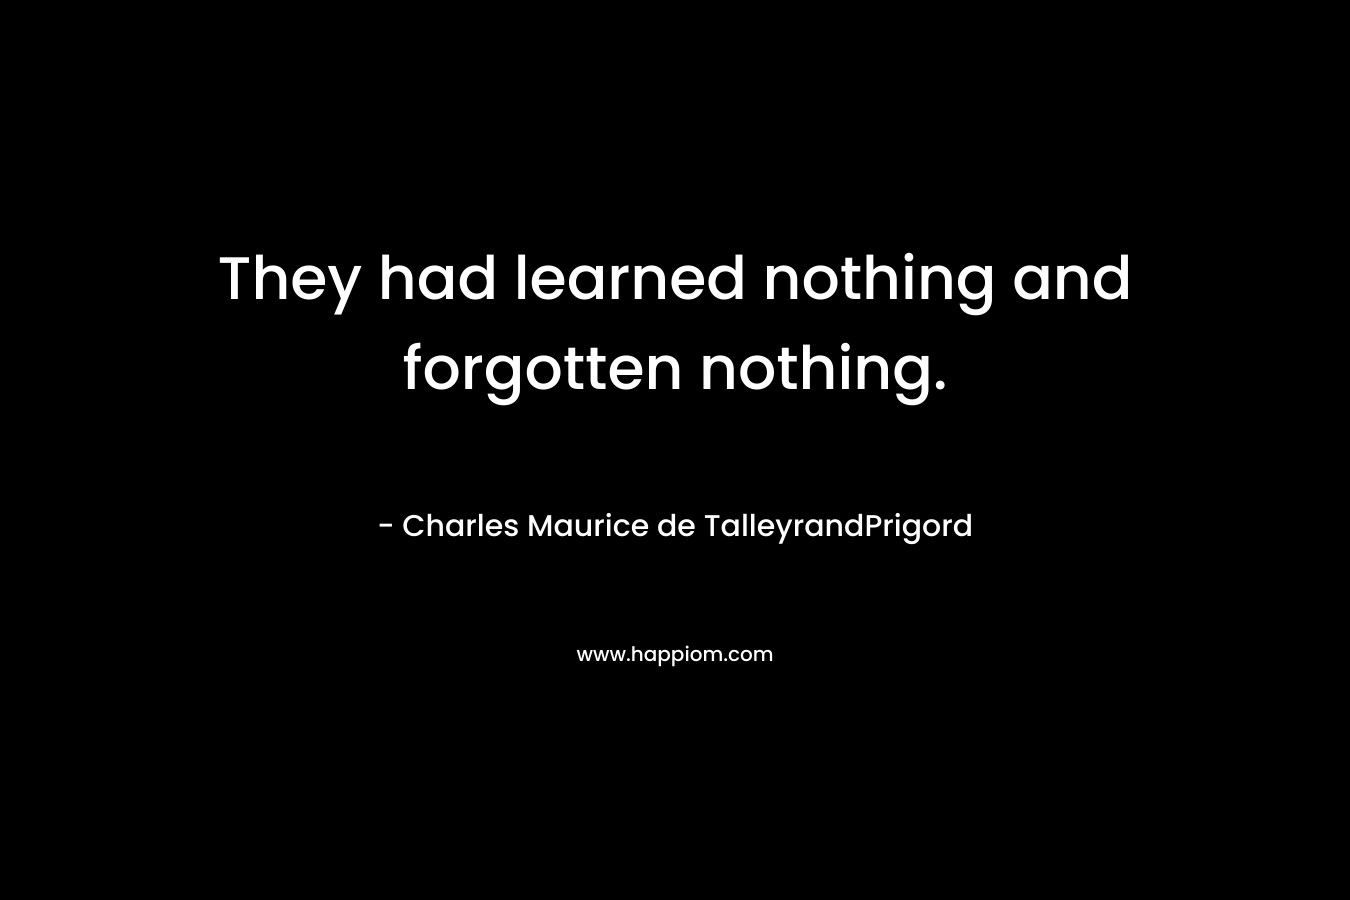 They had learned nothing and forgotten nothing. – Charles Maurice de TalleyrandPrigord